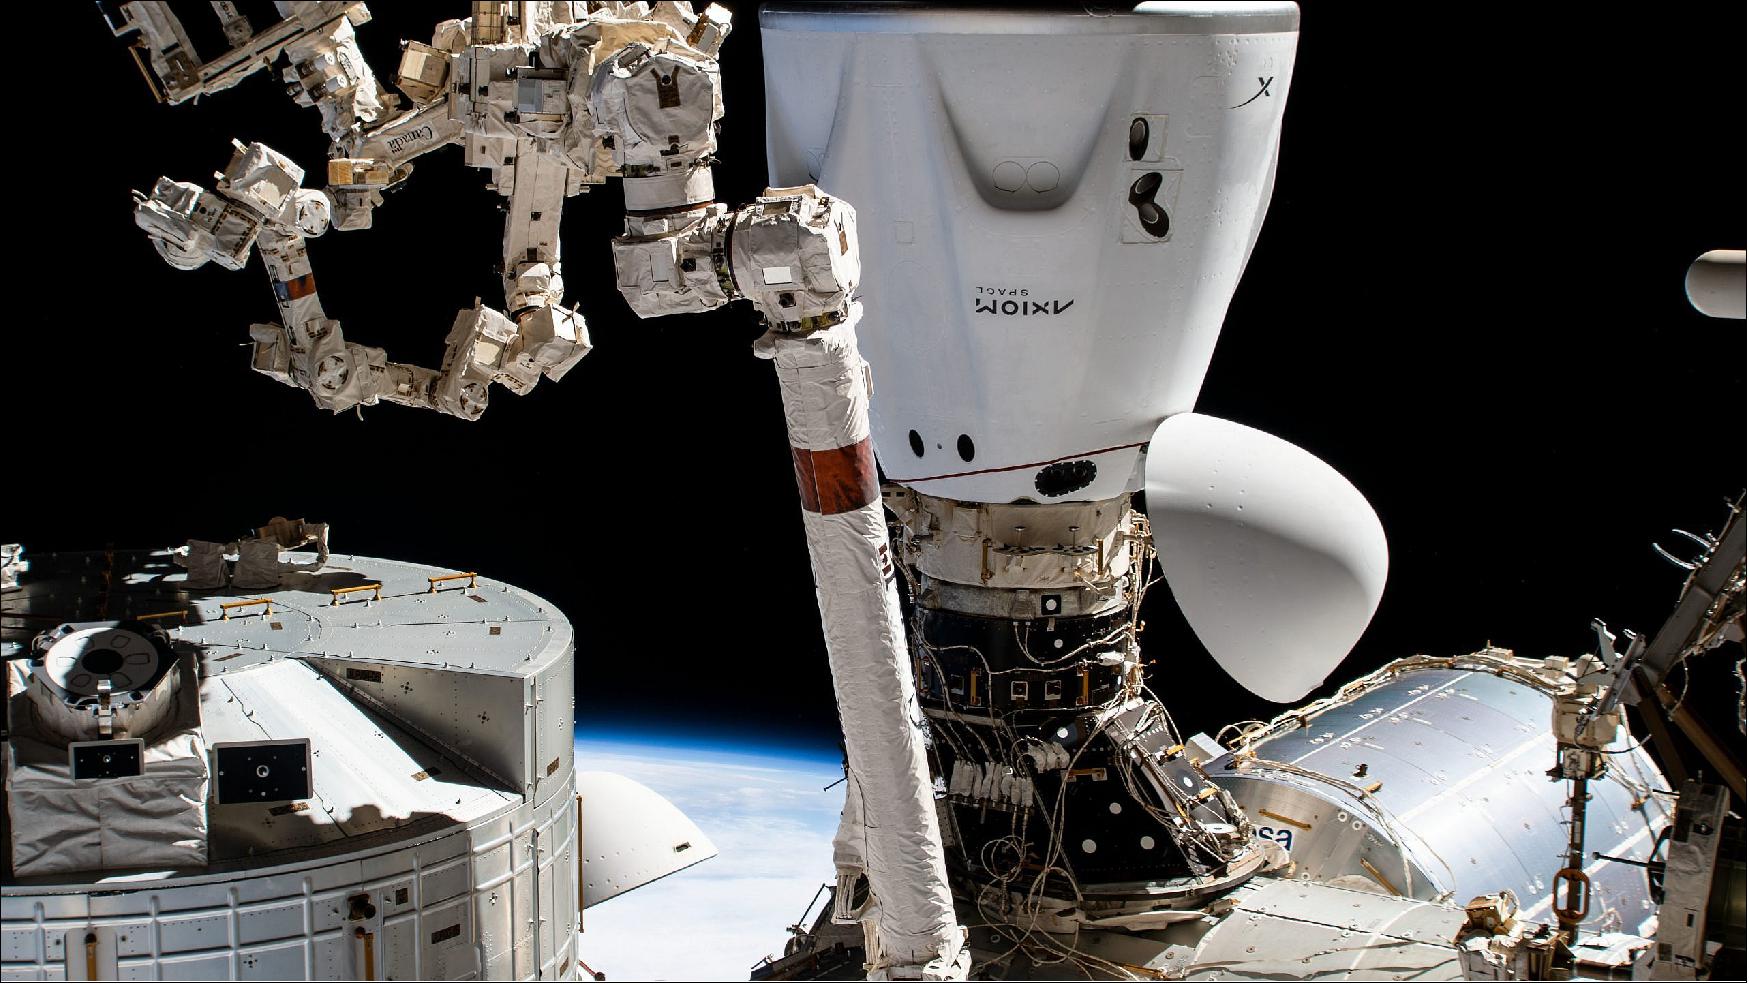 Figure 6: The SpaceX Dragon Endeavour crew ship is pictured docked to the Harmony module (image credit: NASA TV)